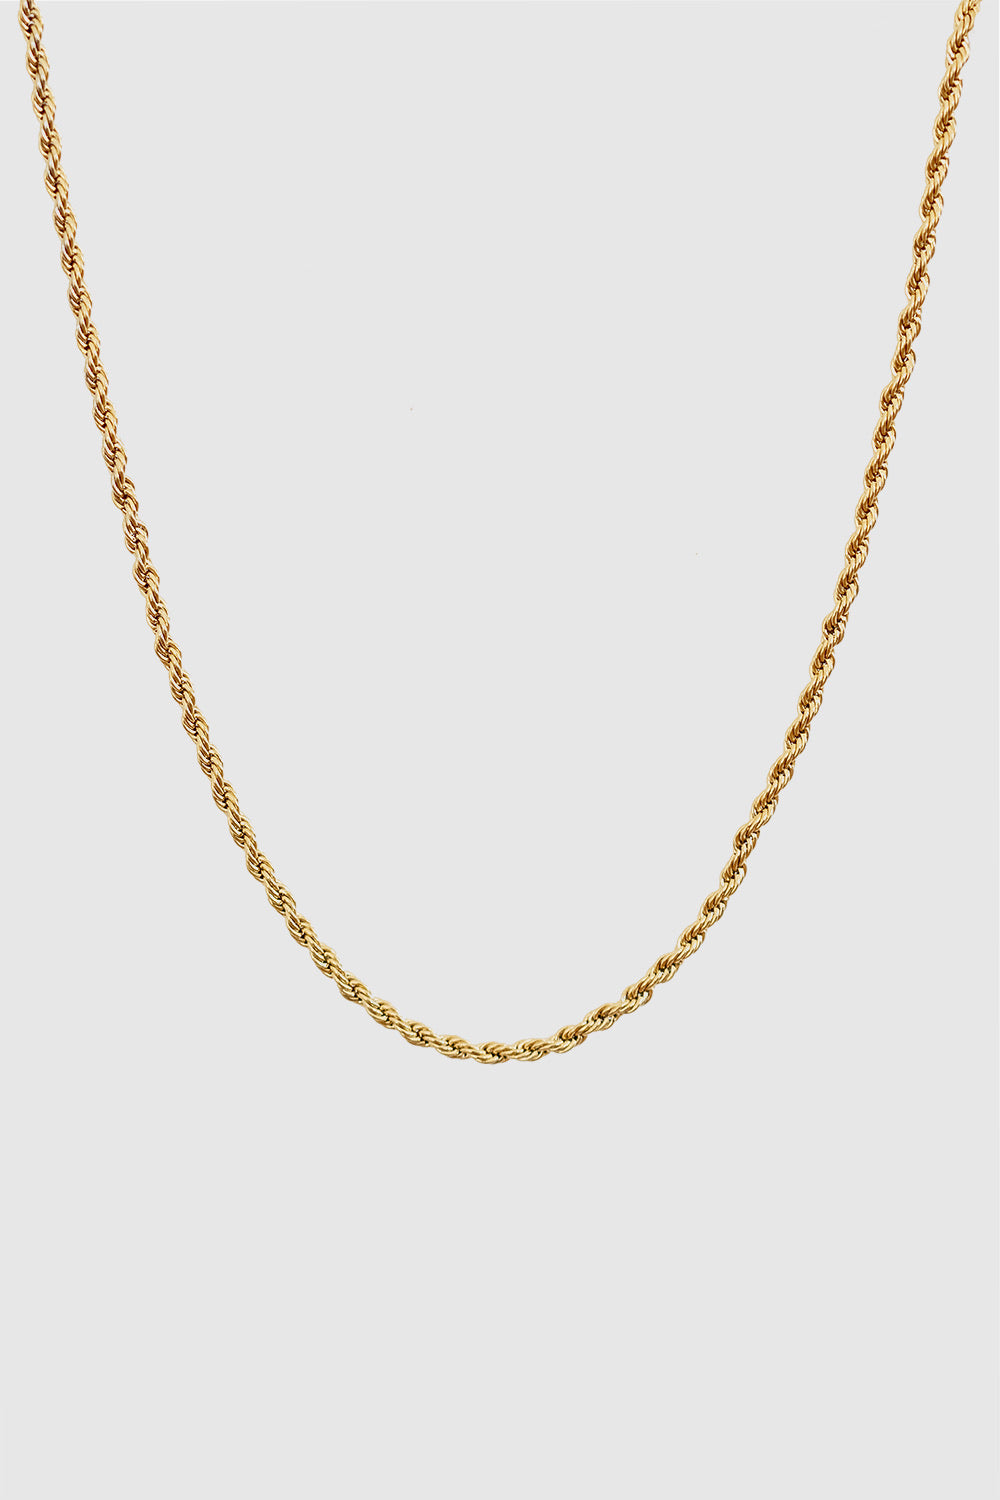 Vintage Twisted Chain Gold Necklace